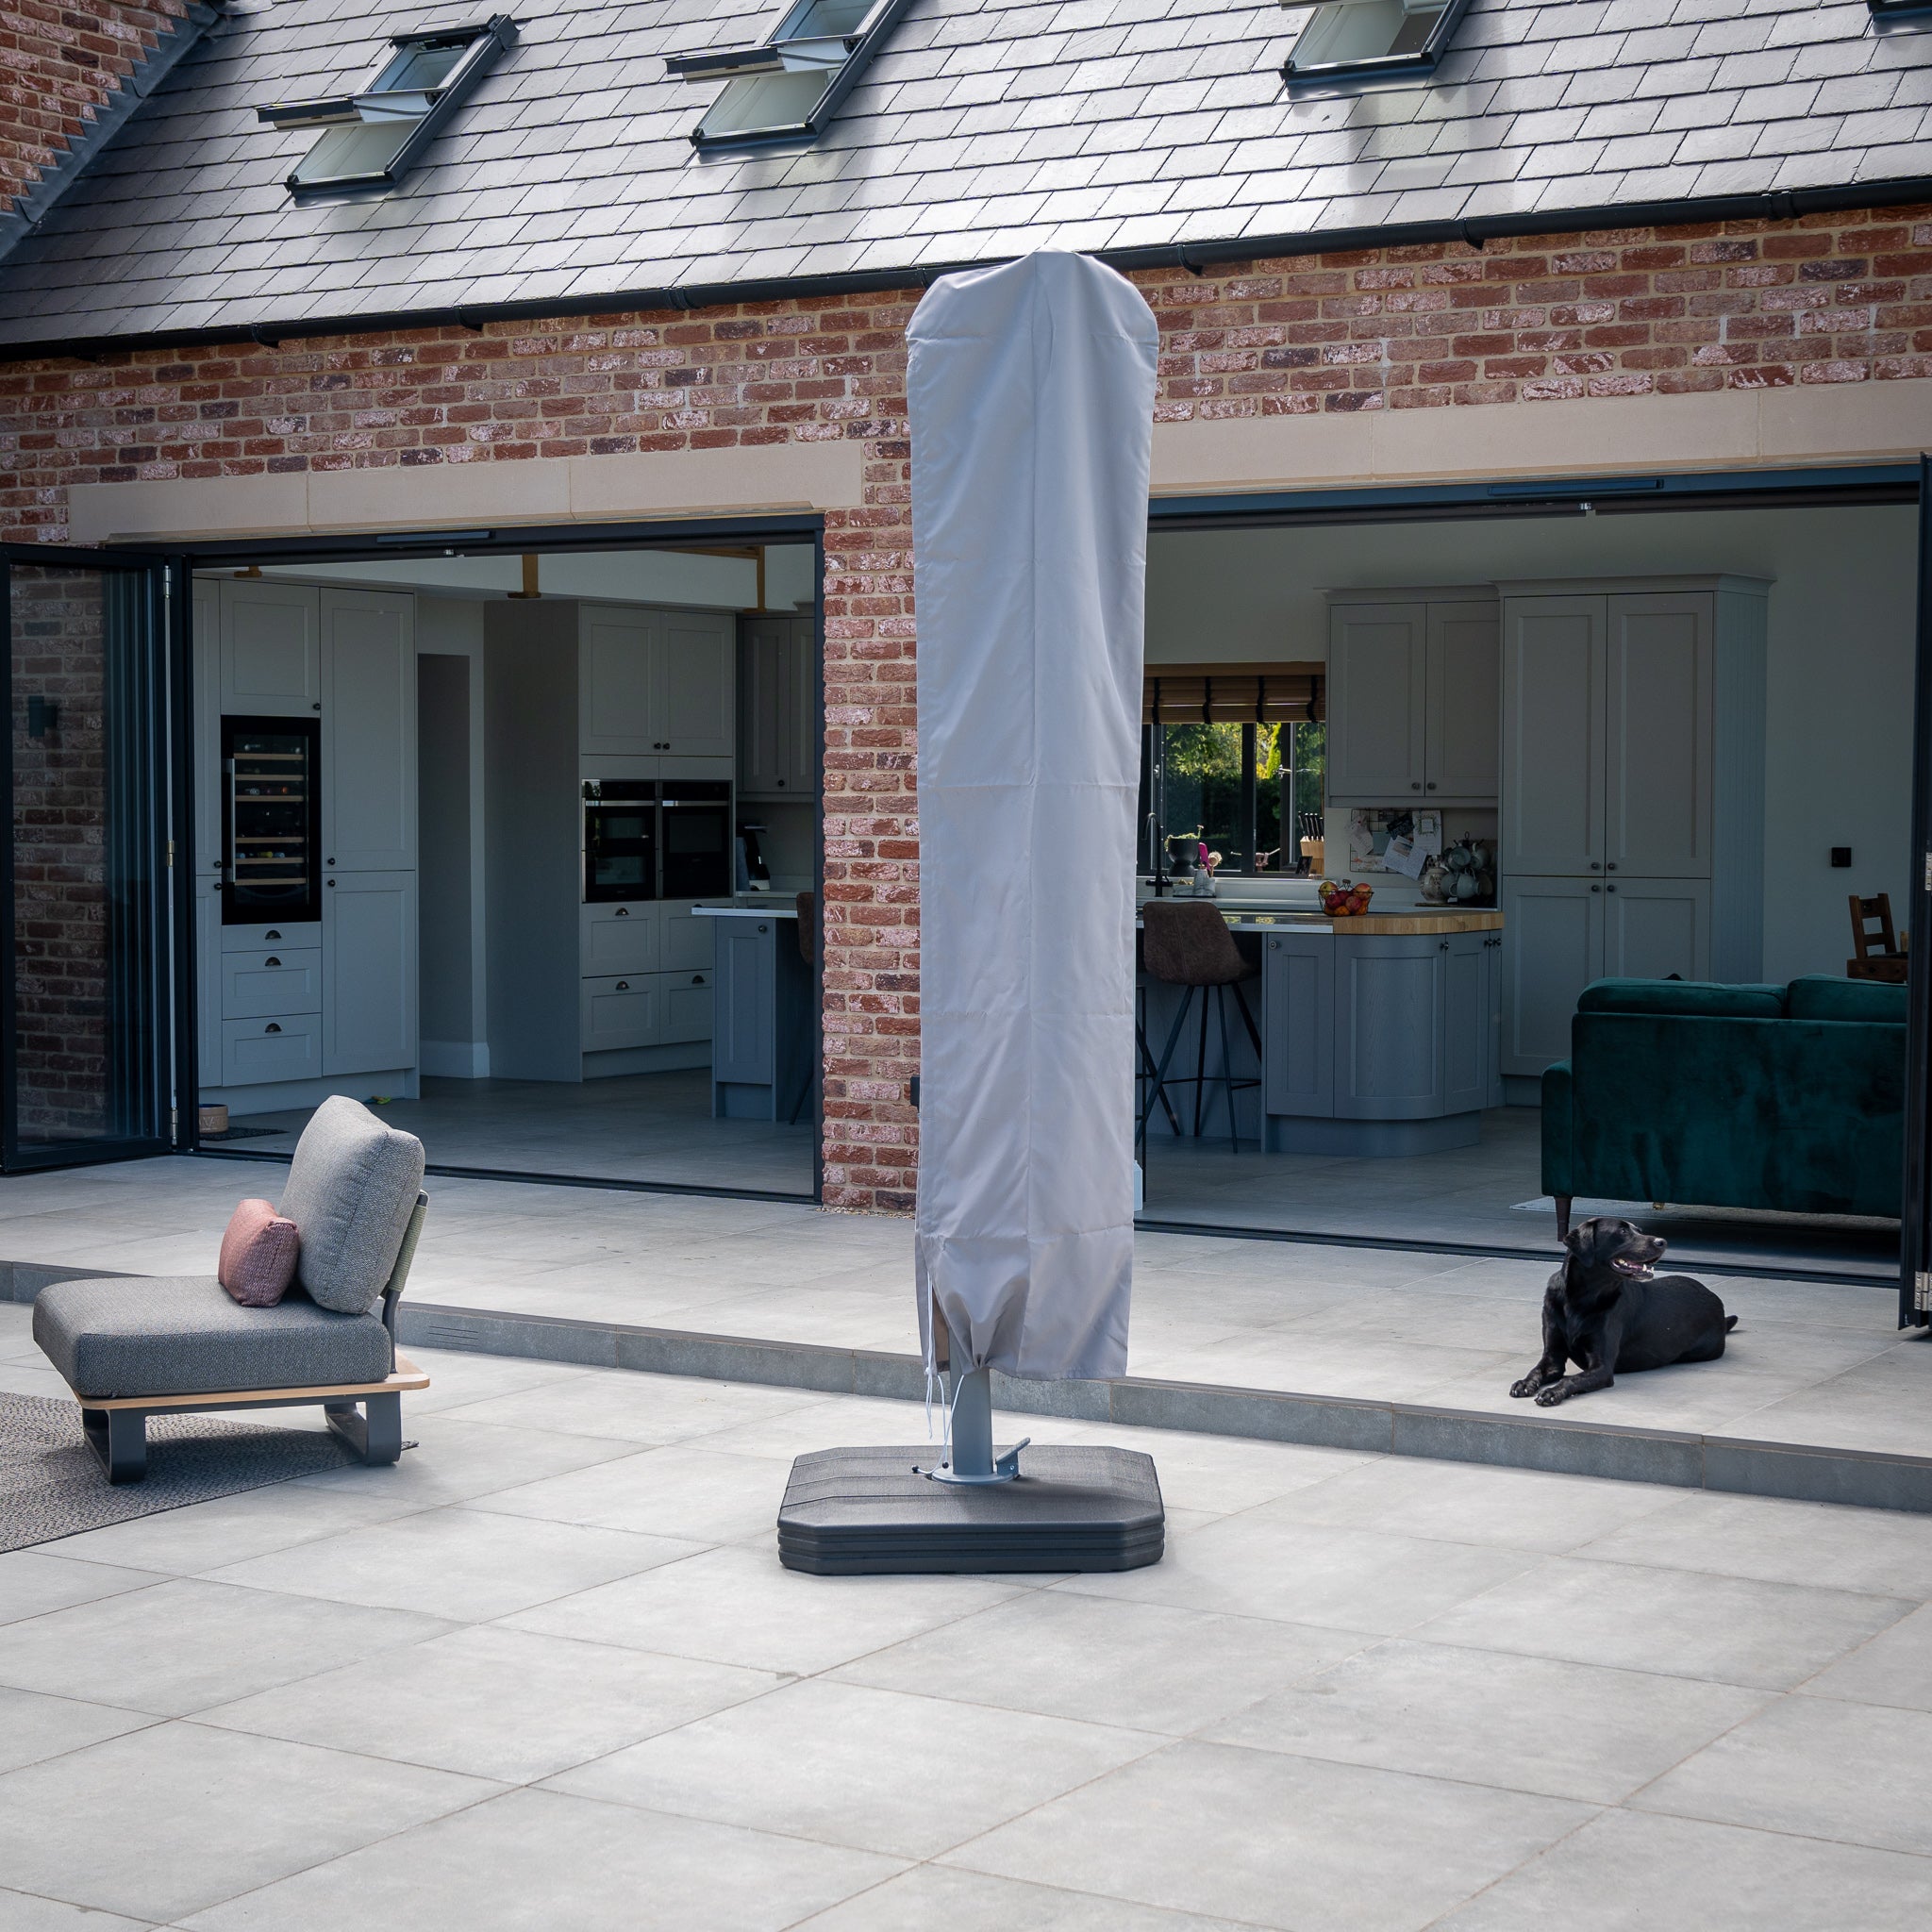 Eros 3m Square Cantilever Parasol in Charcoal